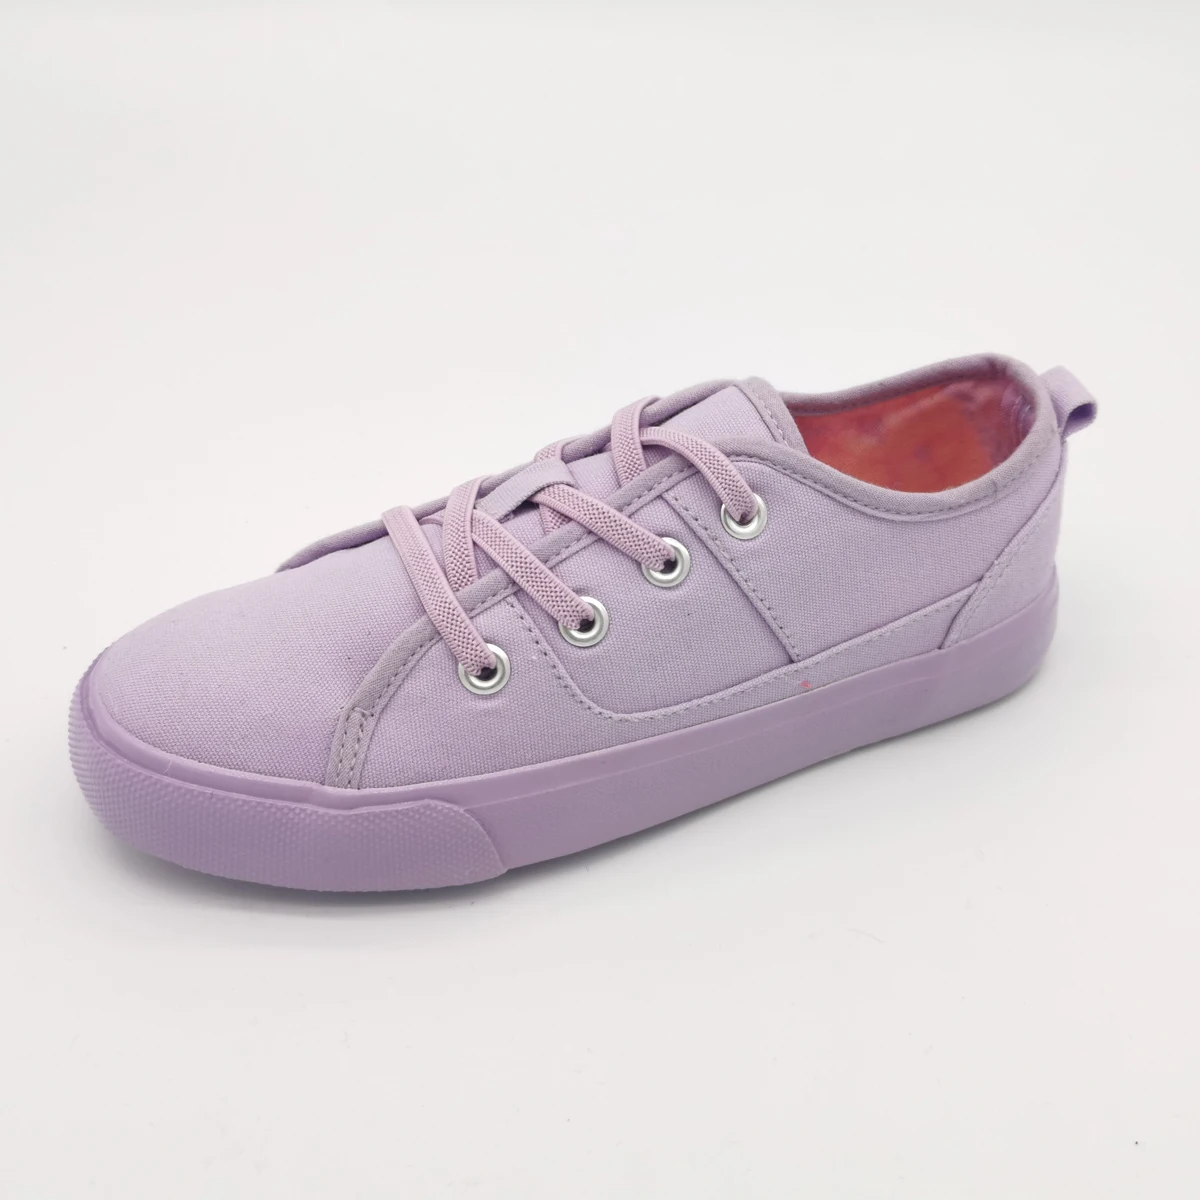 Classical Kids canvas shoes Comfortable children casual shoes Shcool shoes for Girls